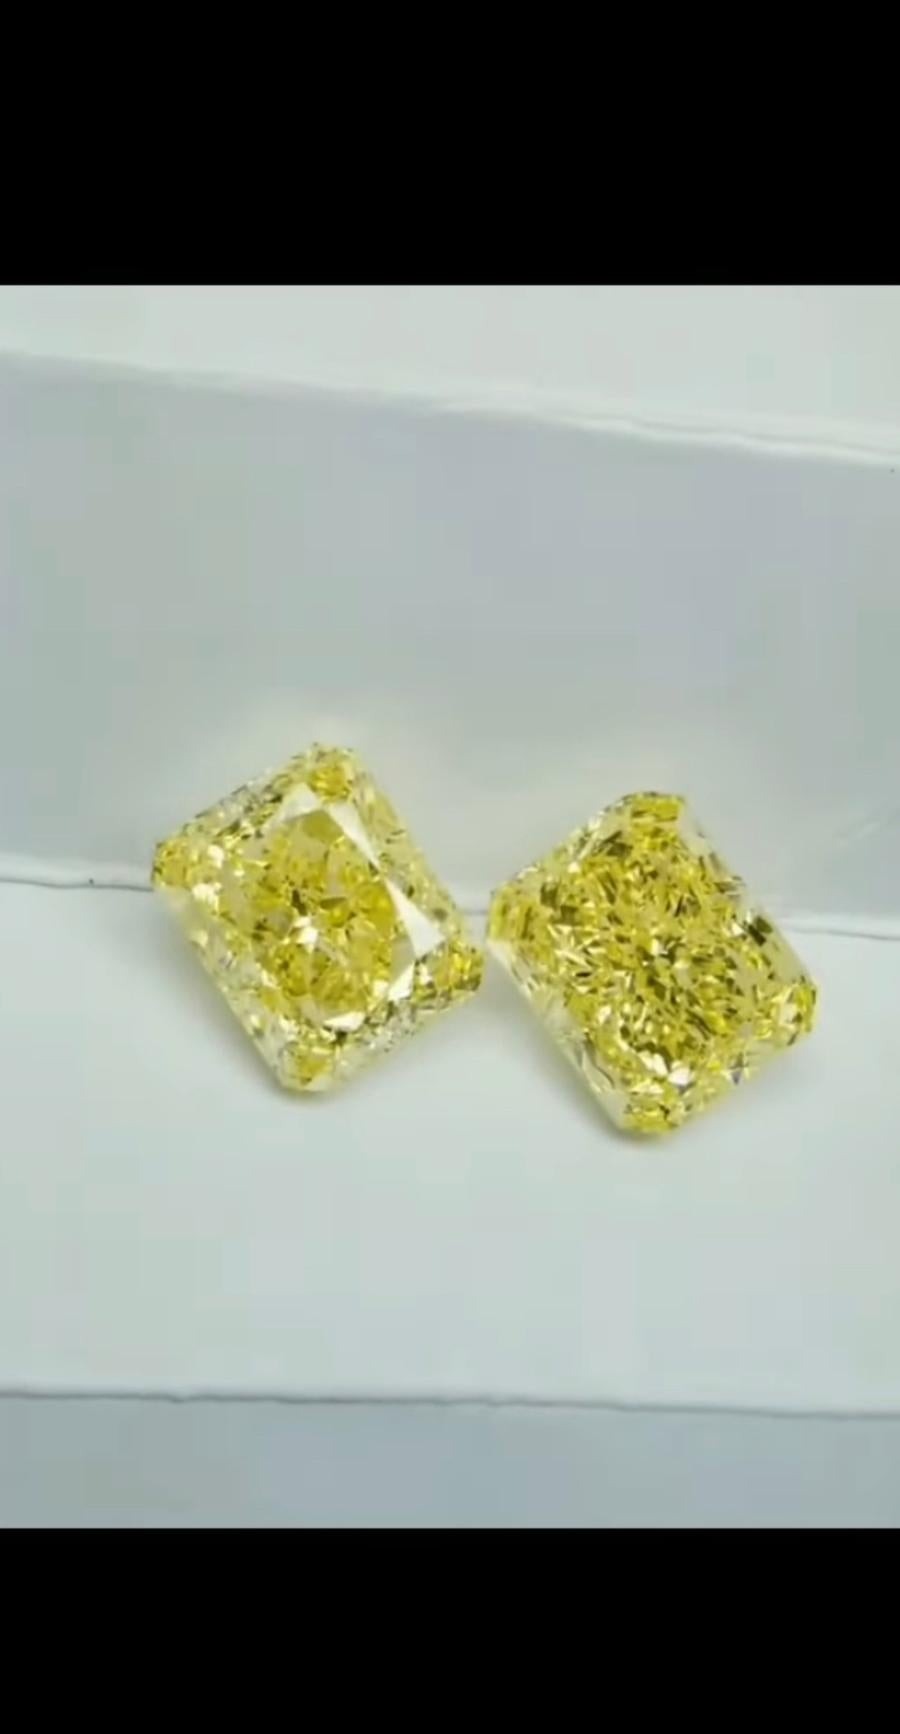 Exceptional two GIA certified loose natural  fancy yellow diamonds 
 ct 5,01 fancy yellow color, VVS1 clarity, and ct 5,07 fancy yellow color , VS1 clarity.
Complete with GIA certificates.

Special discount price - 60% of retail price.

